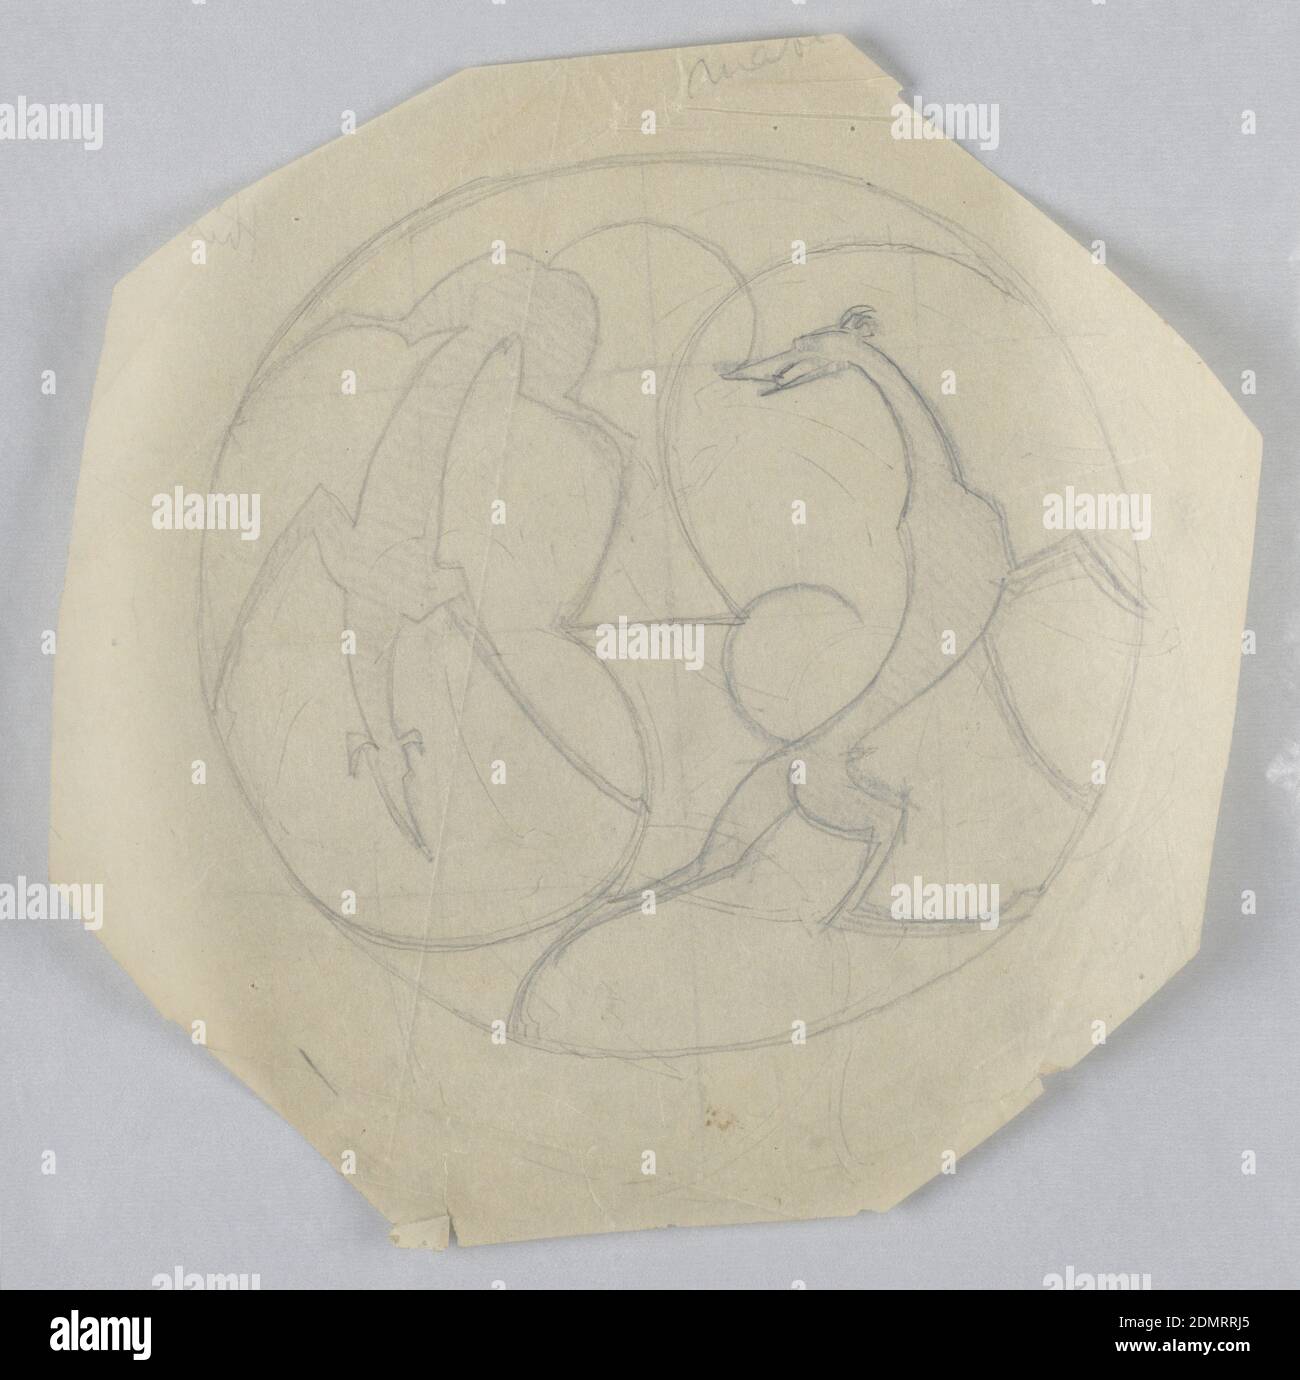 Hounds, William Hunt Diederich, American, b. Hungary, 1884–1953, Graphite on tracing paper, Circular design with two hounds., USA, ca. 1920, ornament, Drawing Stock Photo